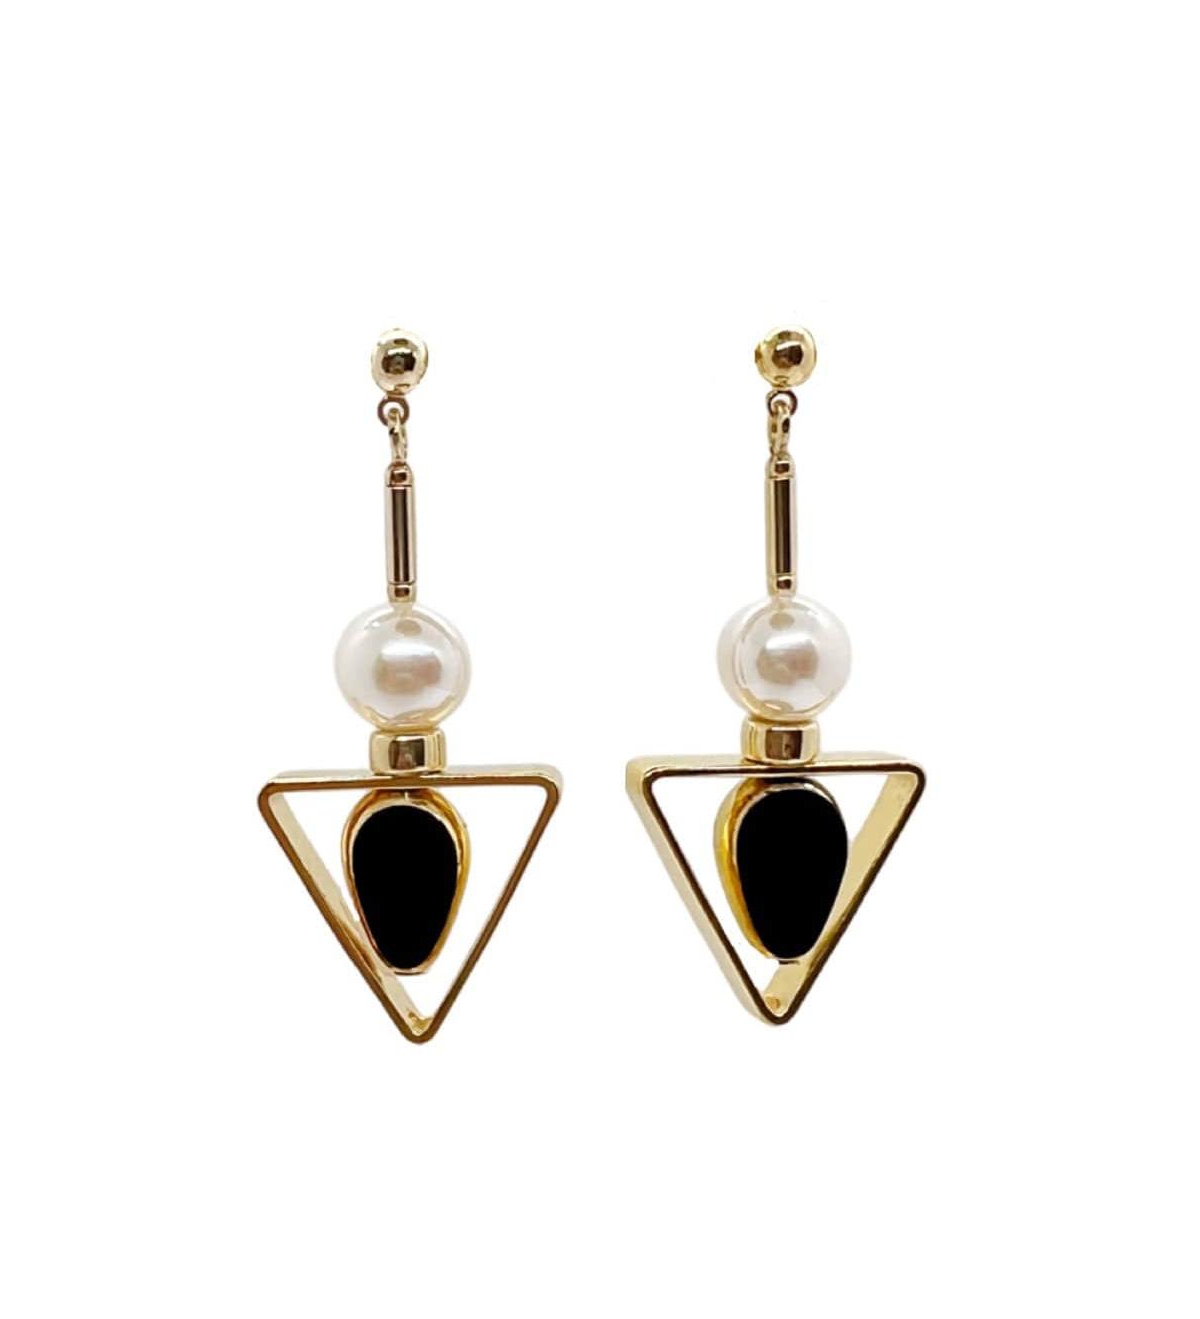 Triangle & Pearls Earrings - Black, white and gold